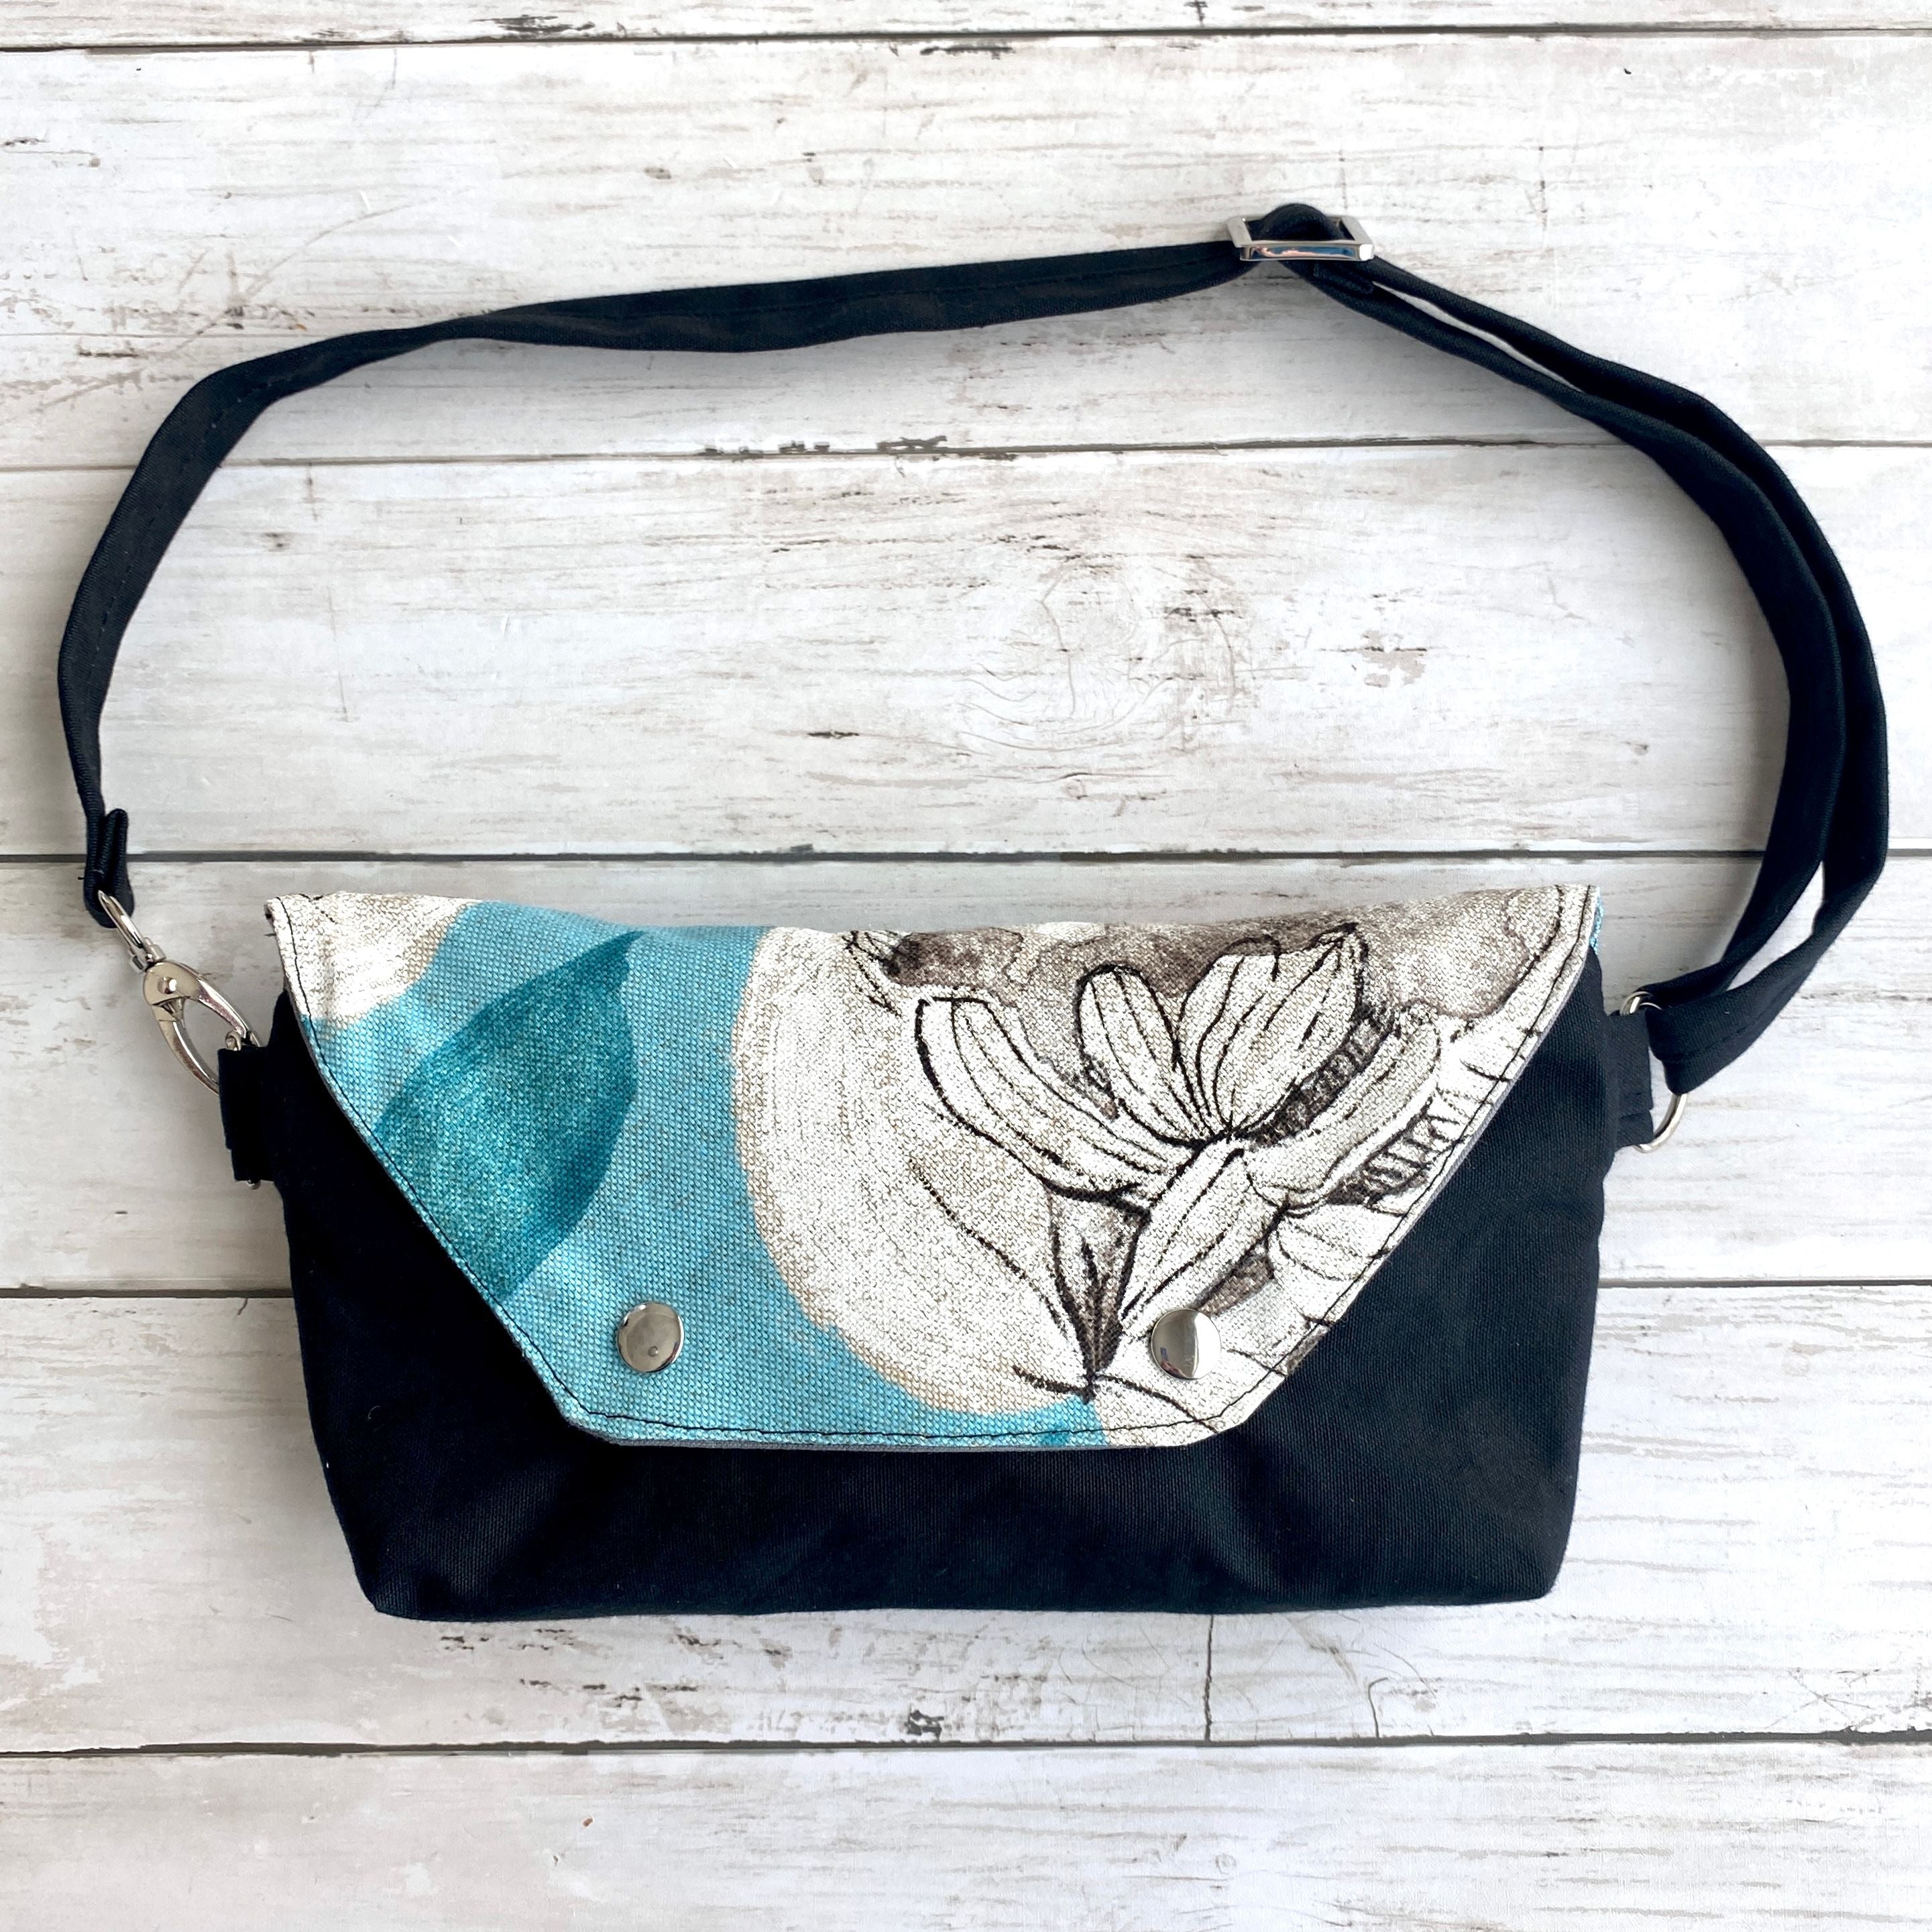 Traveler Fanny Pack in Blue Begonia 3 and Black, RTS